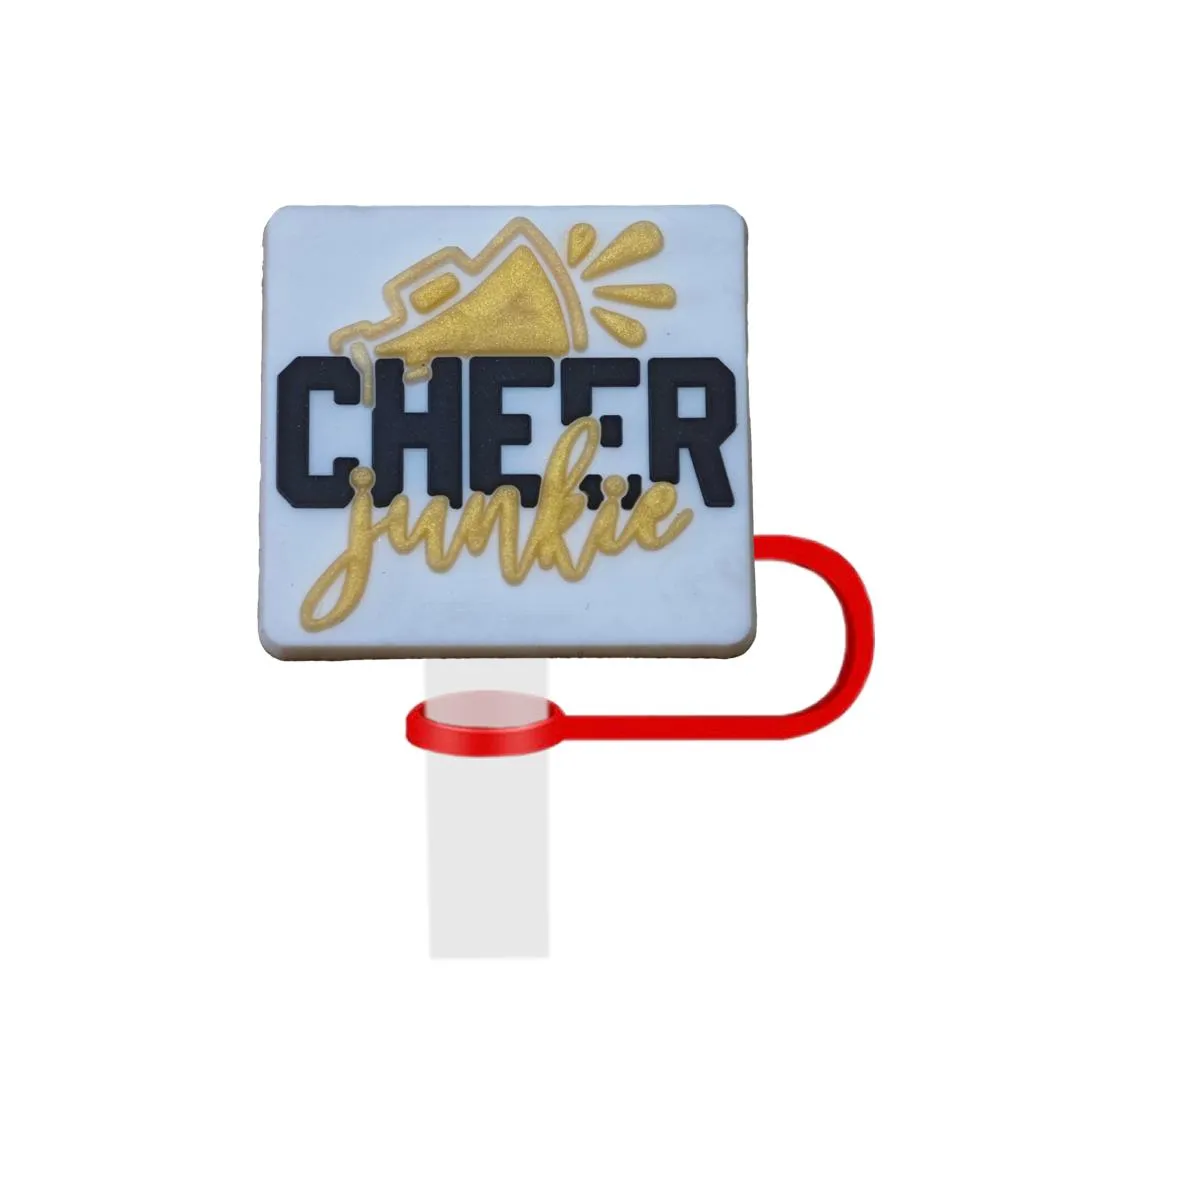 cheer straw cover for  cups dust-proof caps 40 oz tumblers protectors 0.4 in/10mm straws accessories topper pack of 10mm